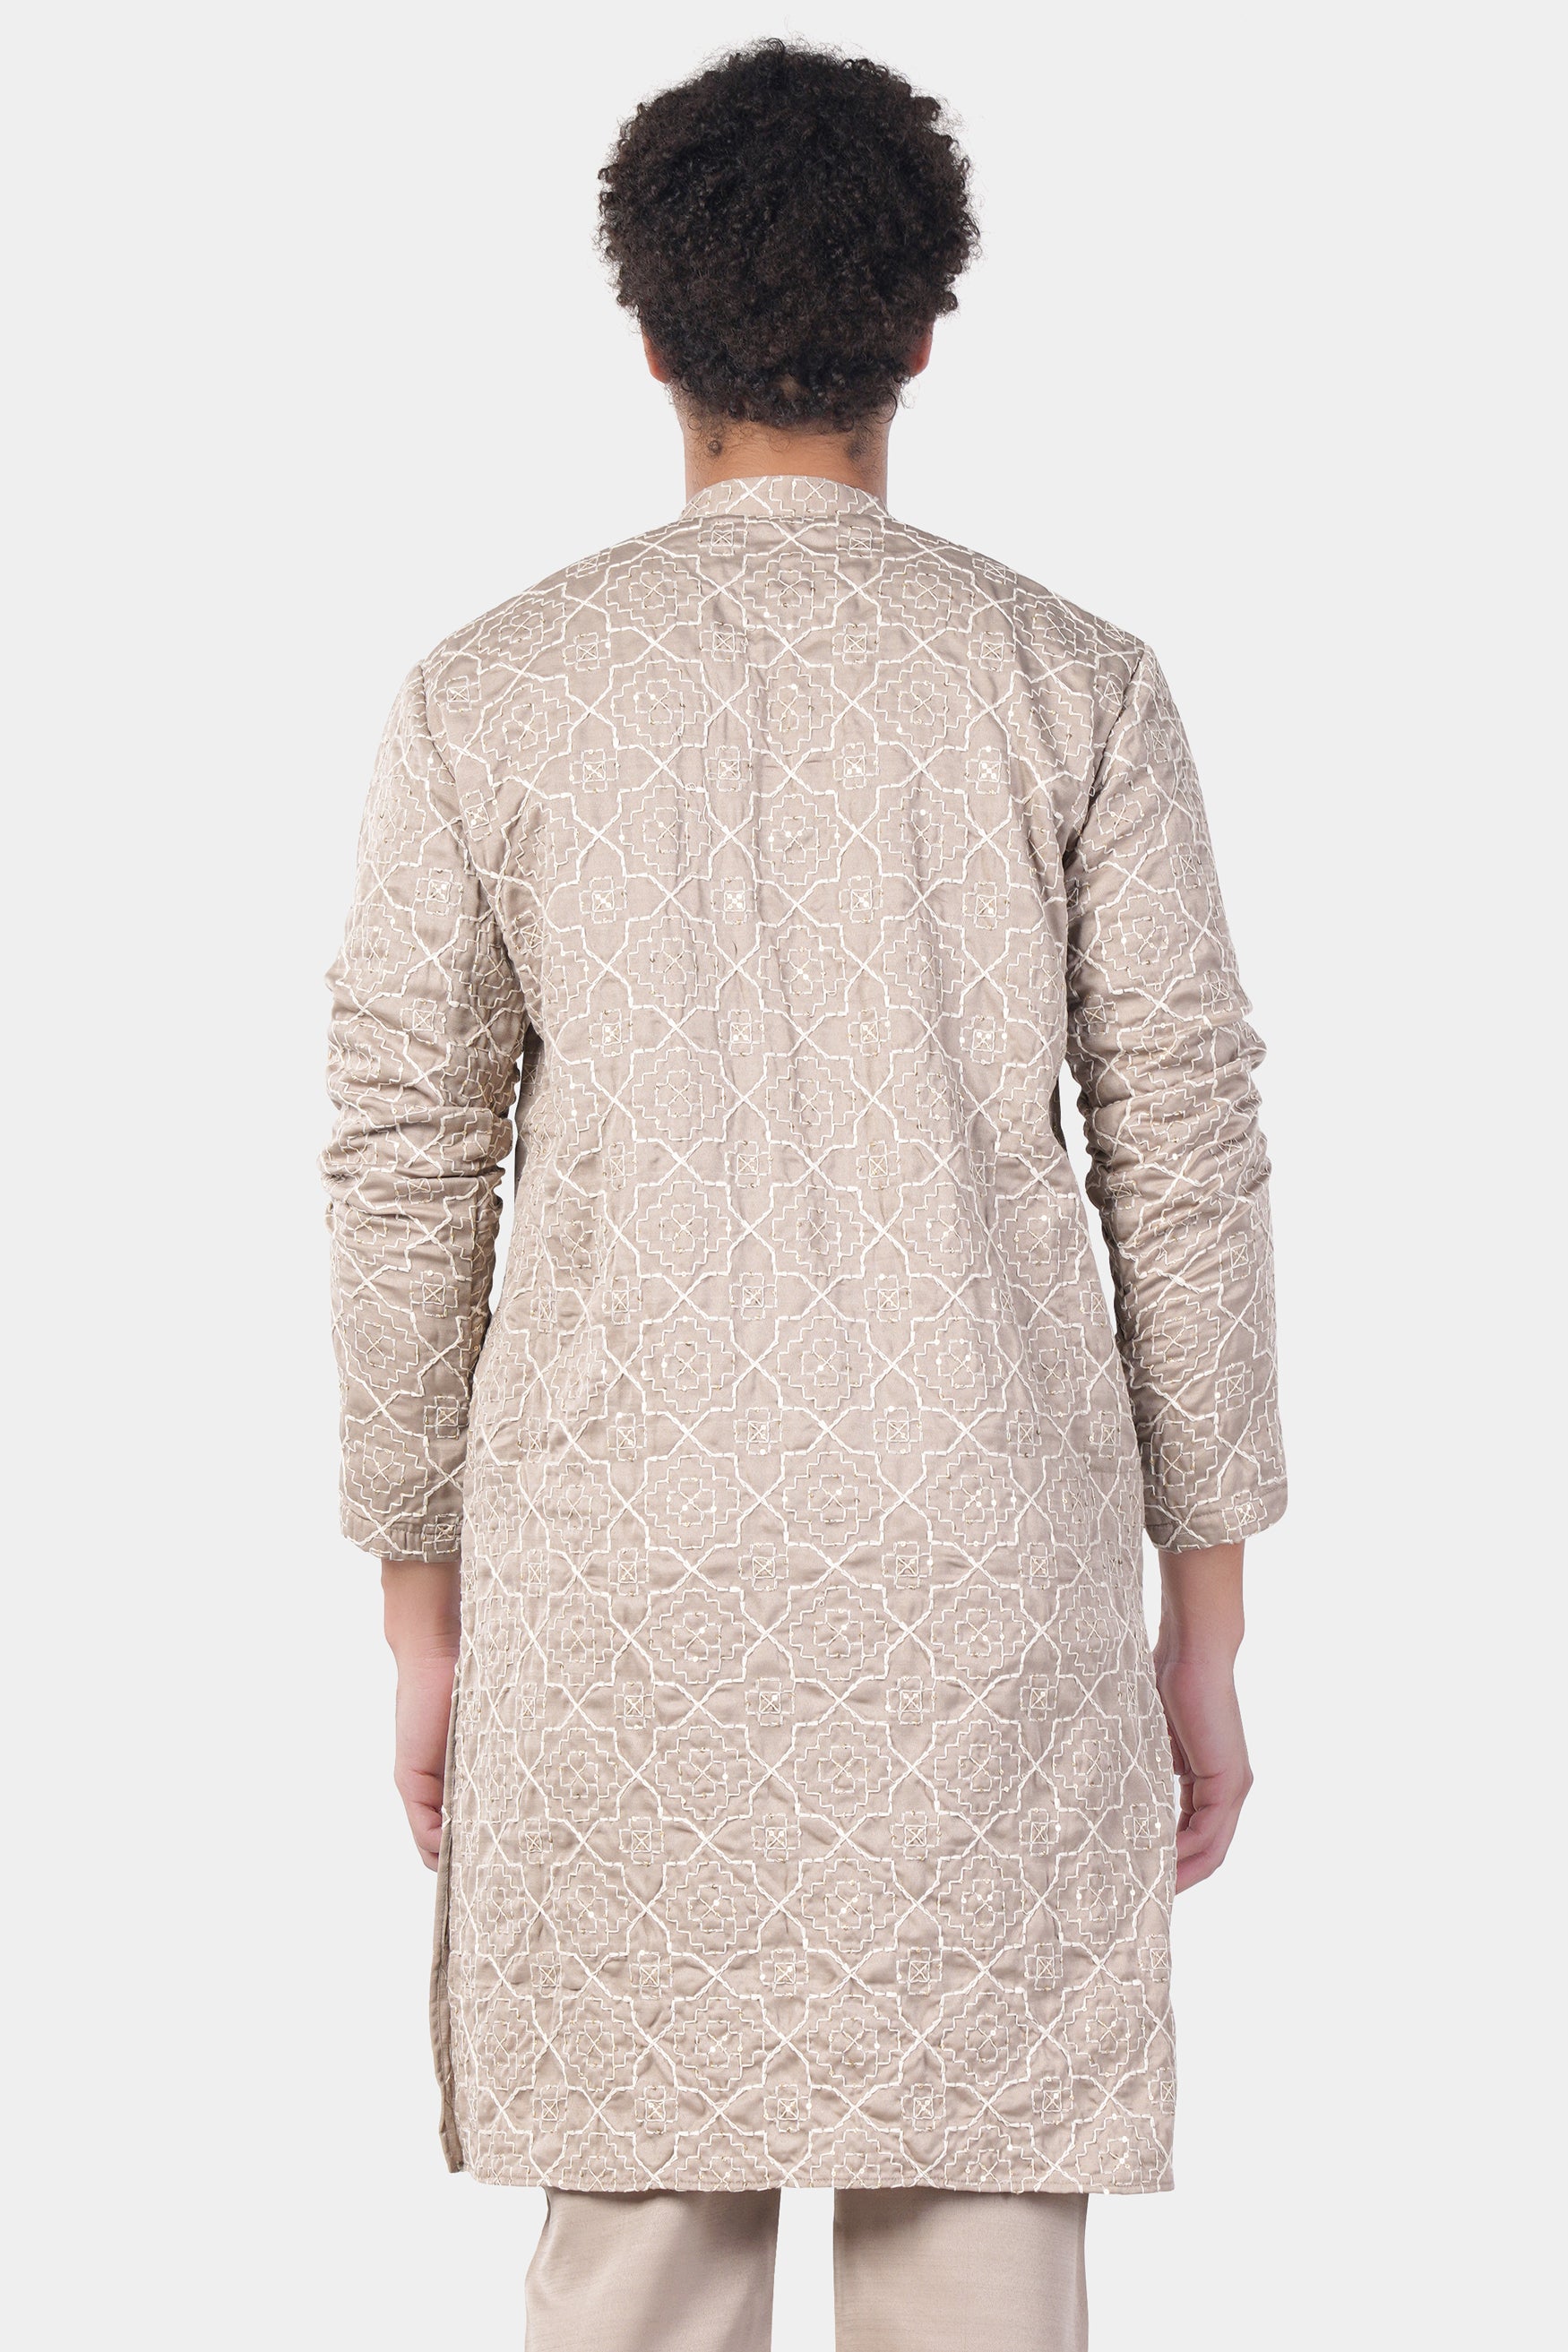 Chalice Brown and White Trellis Pattern Thread and Sequin Embroidered Subtle Sheen Viscose Designer Kurta